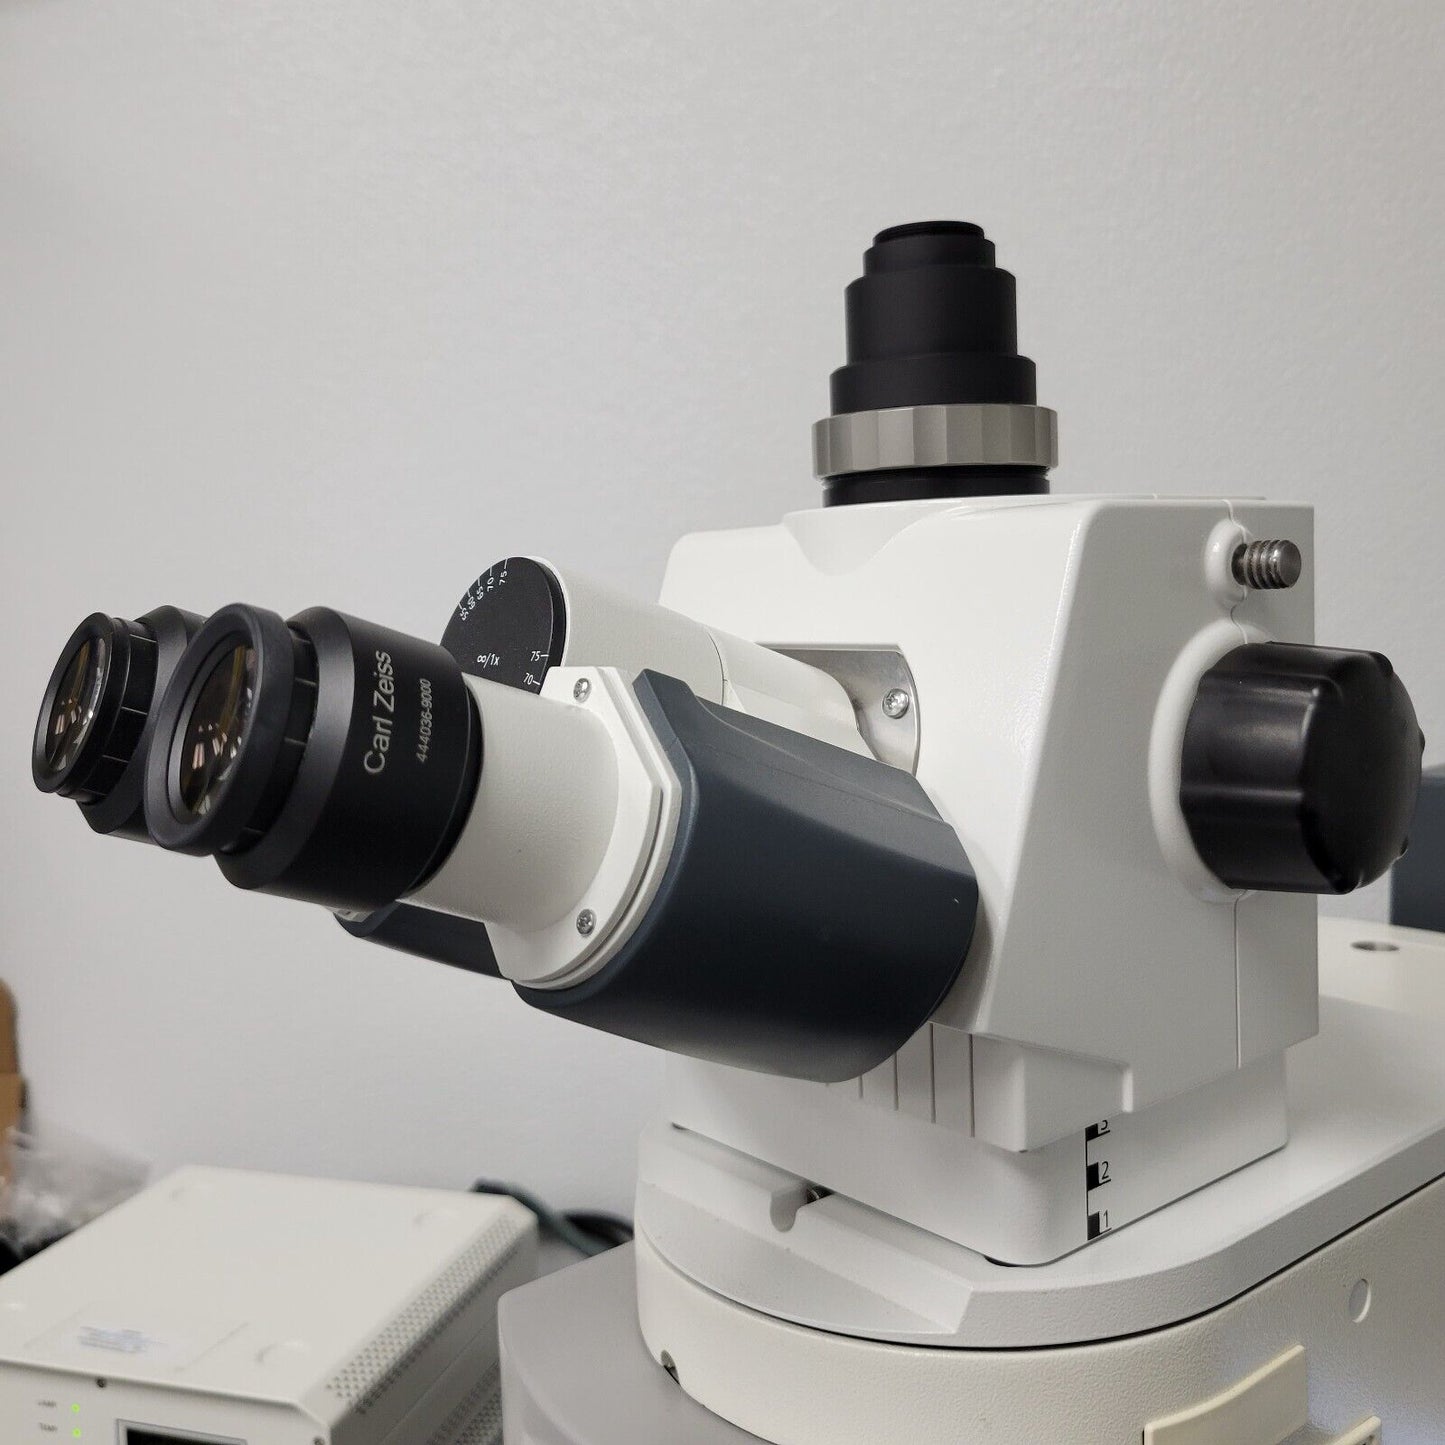 Zeiss Microscope Axio Imager.M1 Motorized with Fluorescence - microscopemarketplace